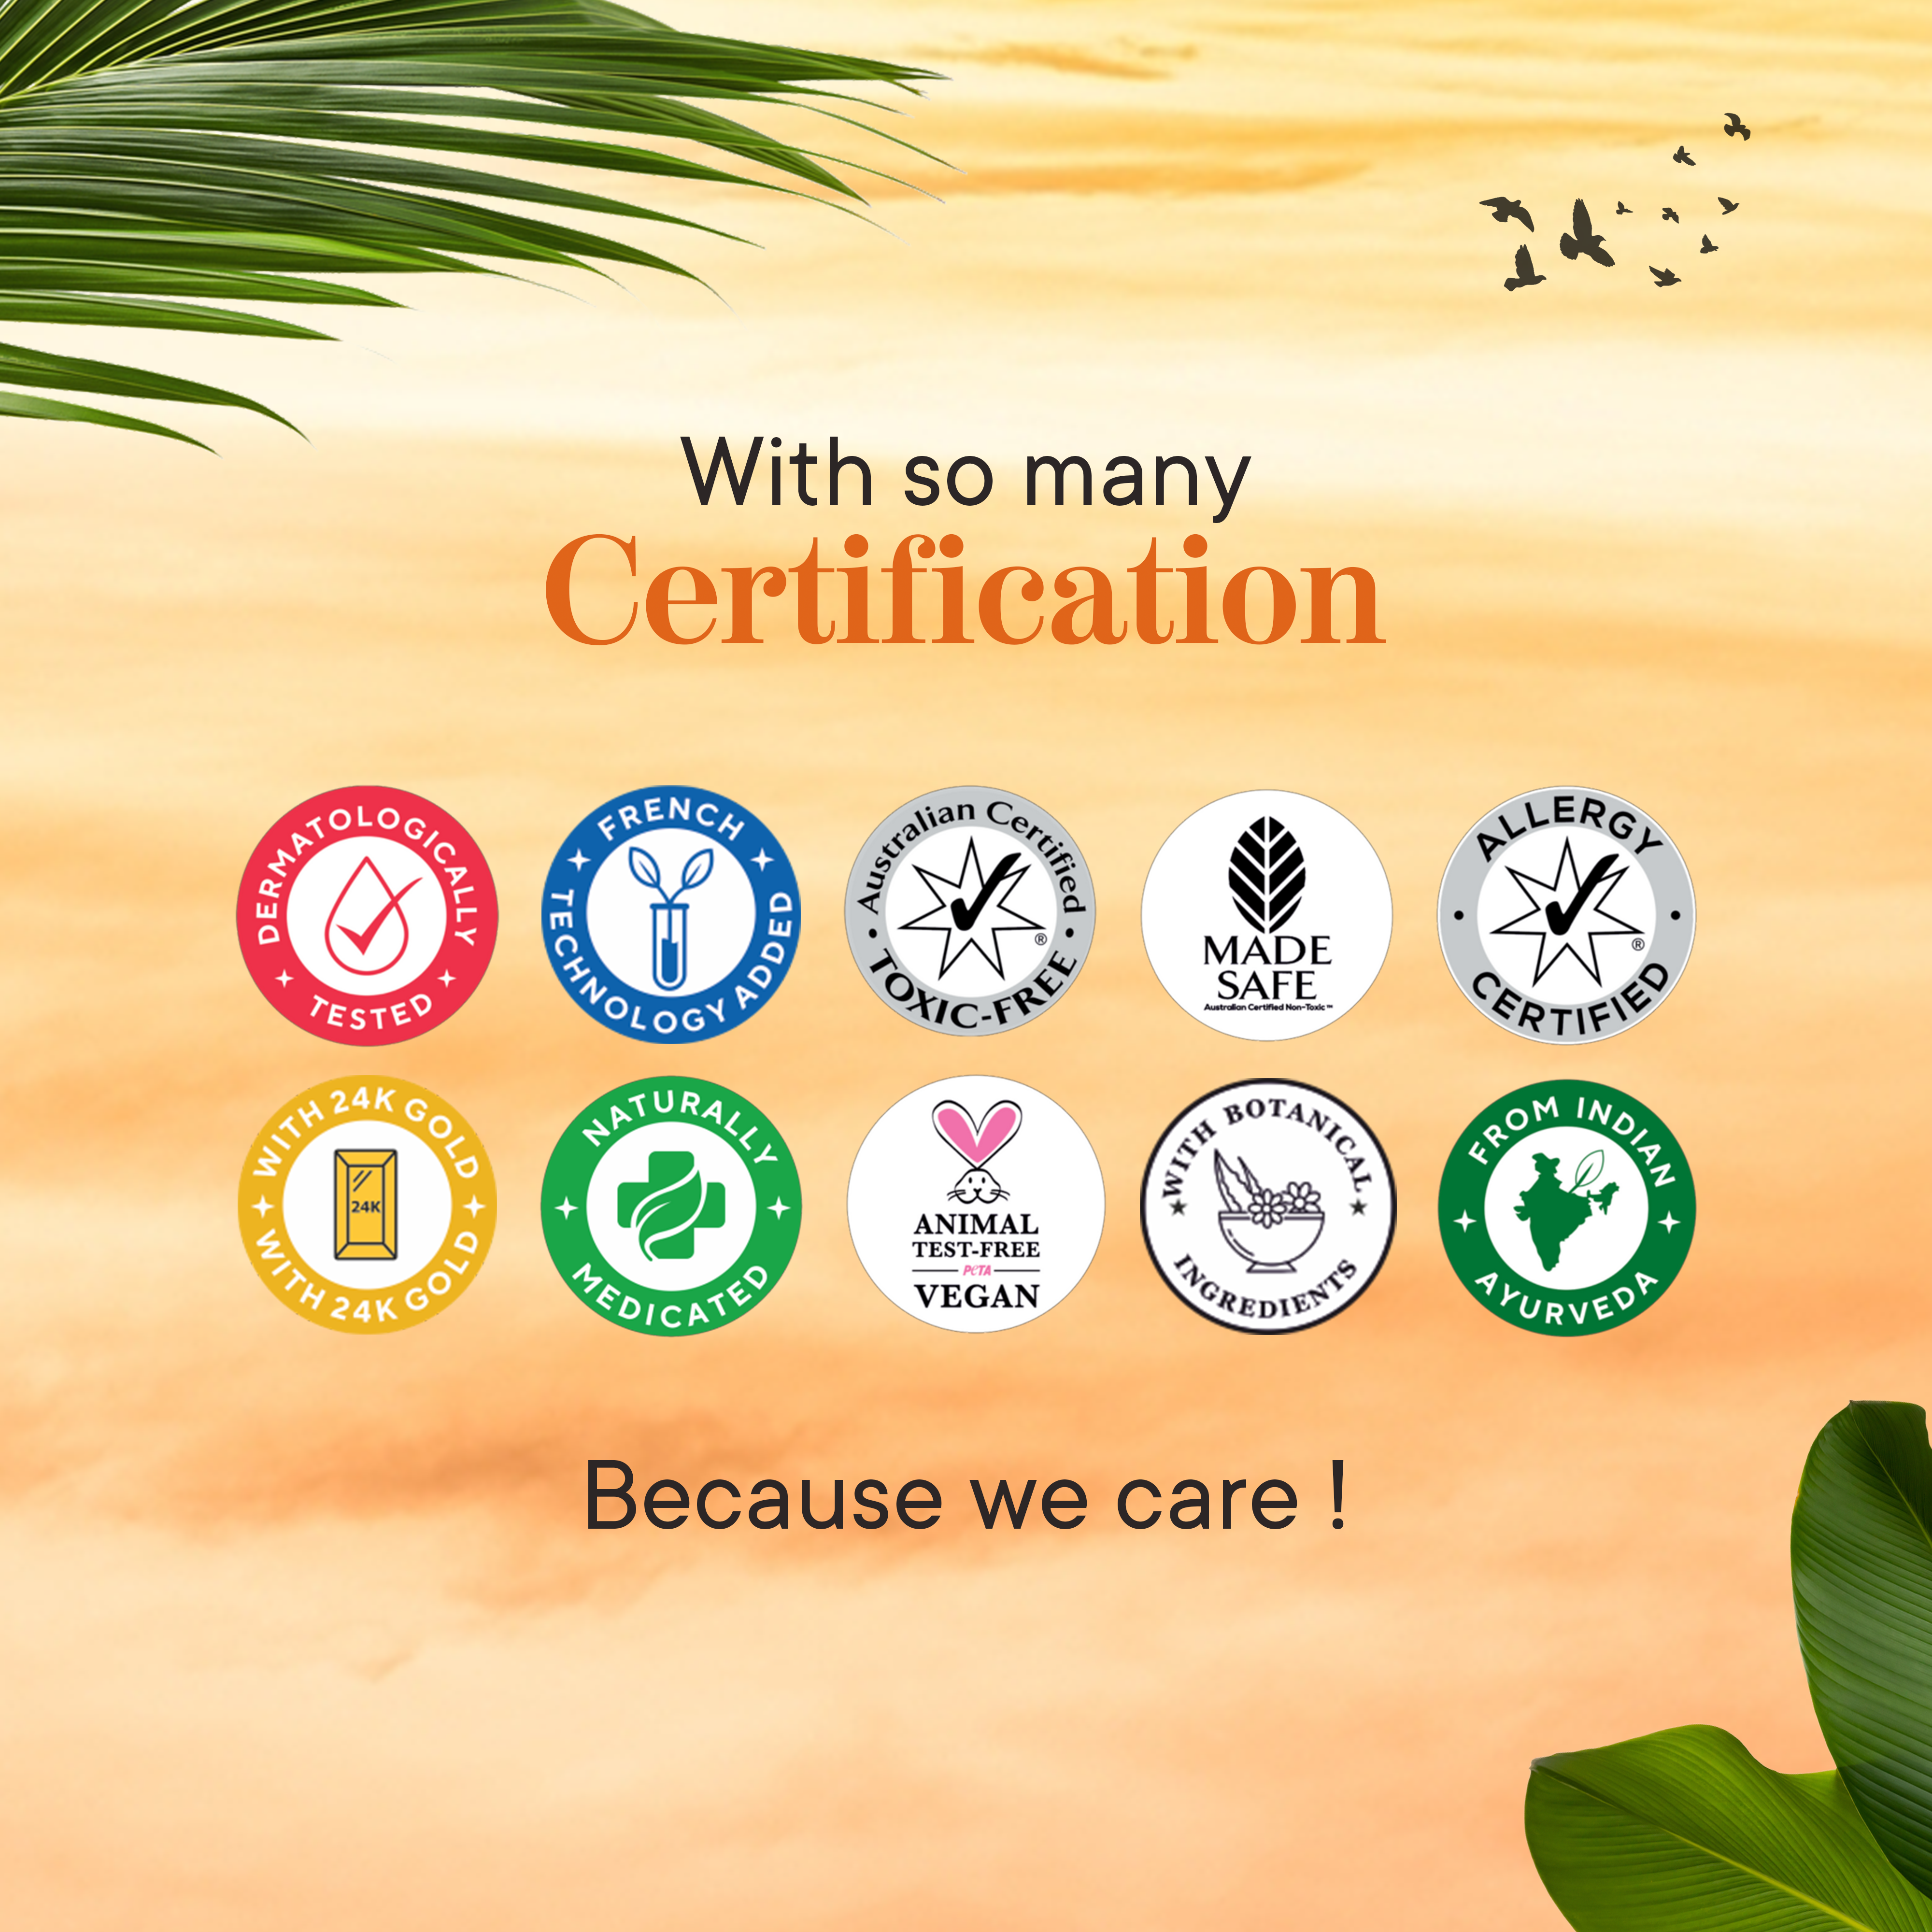 See the Radiance Face Cream Certificates